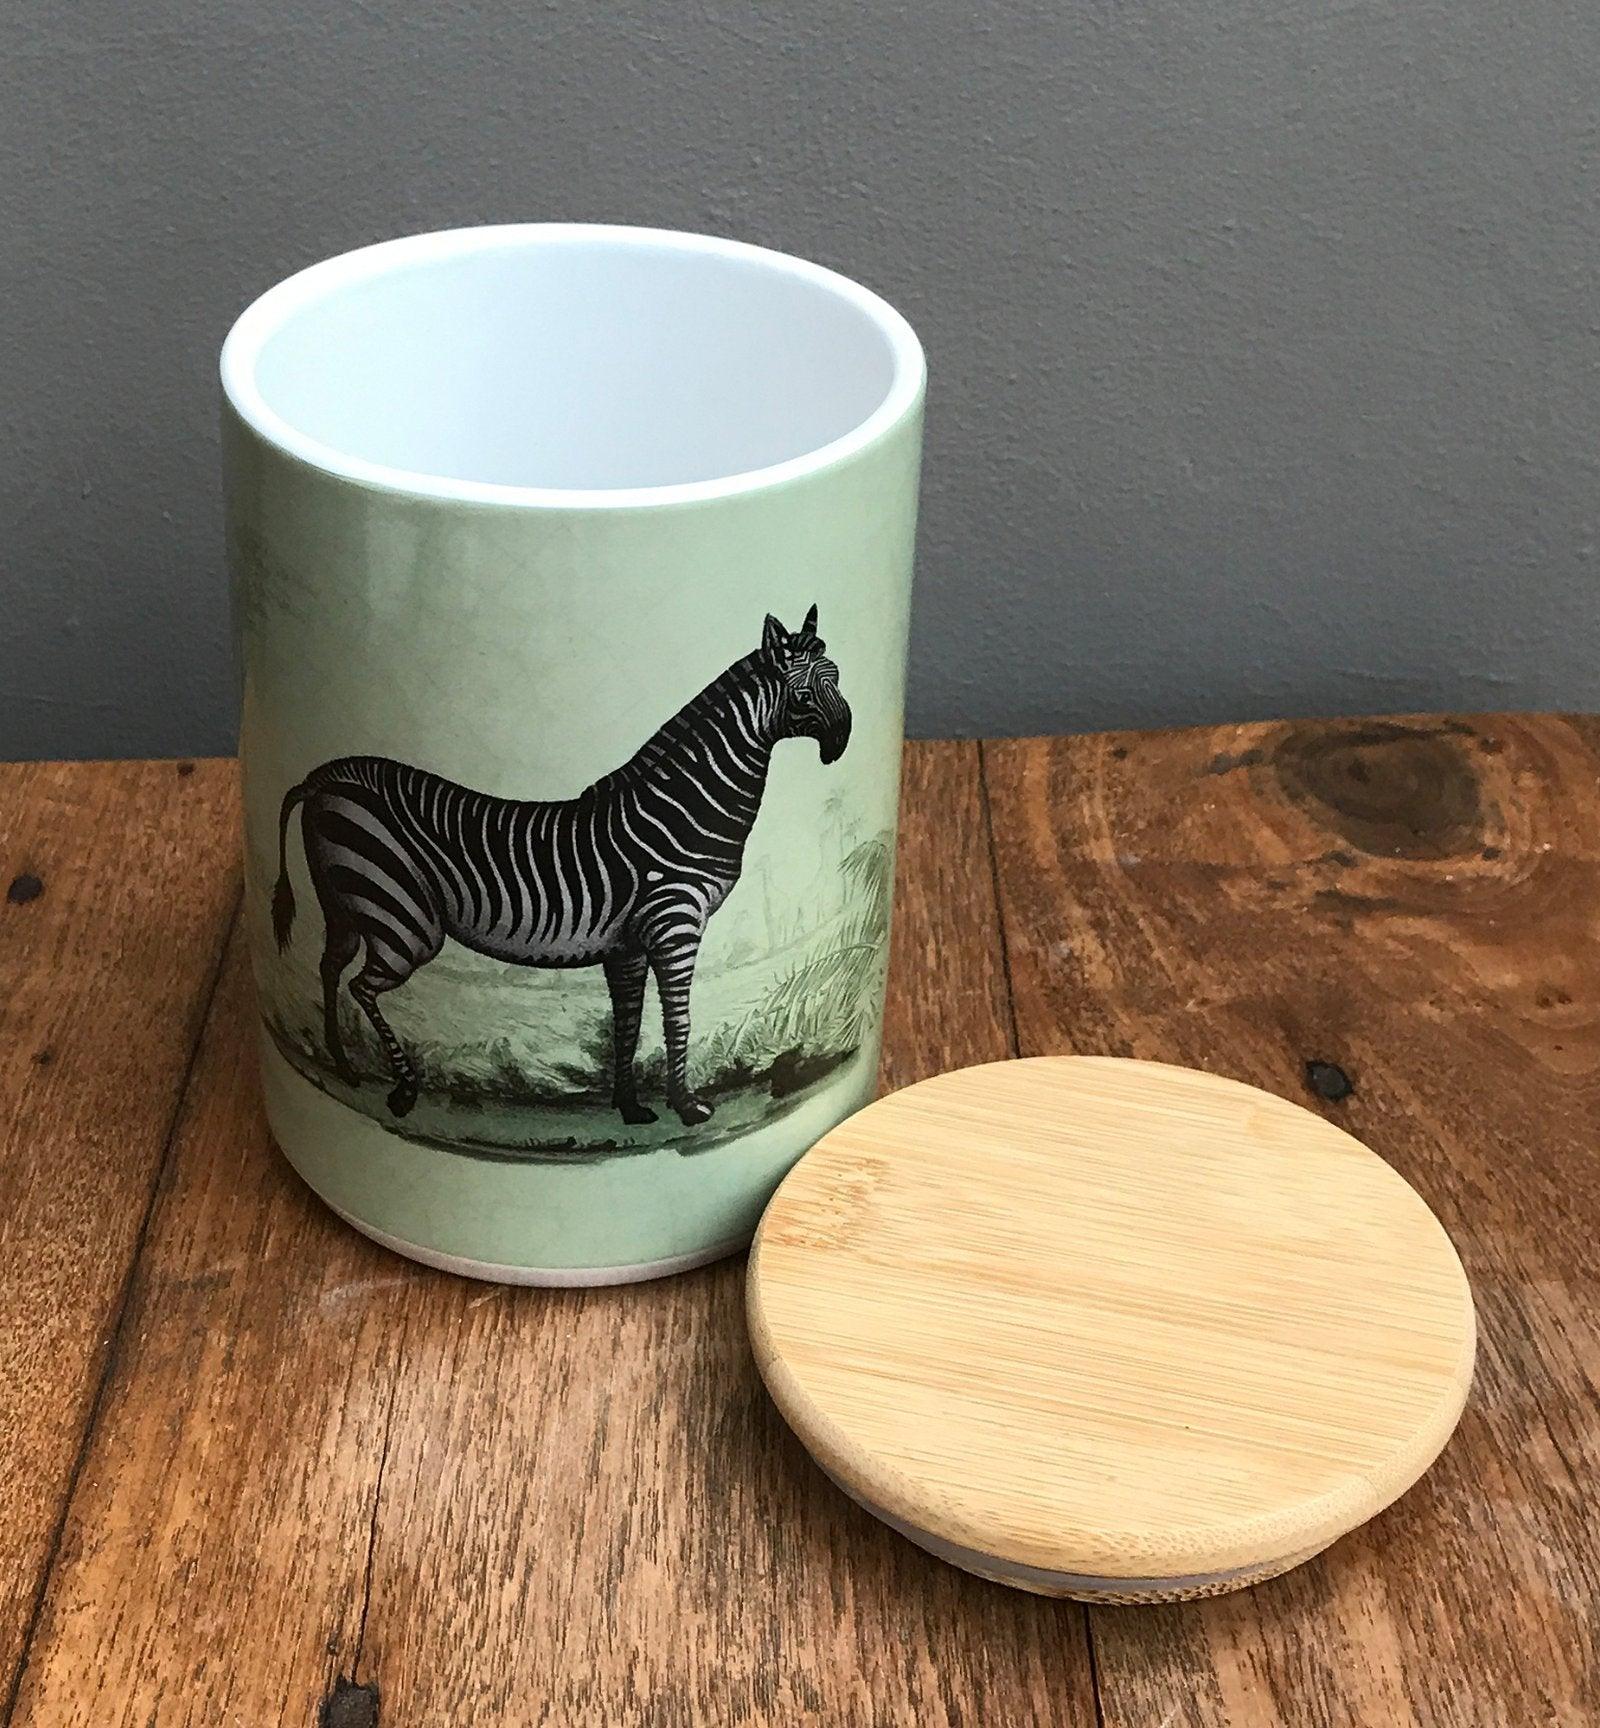 View Ceramic Canister With Zebra information